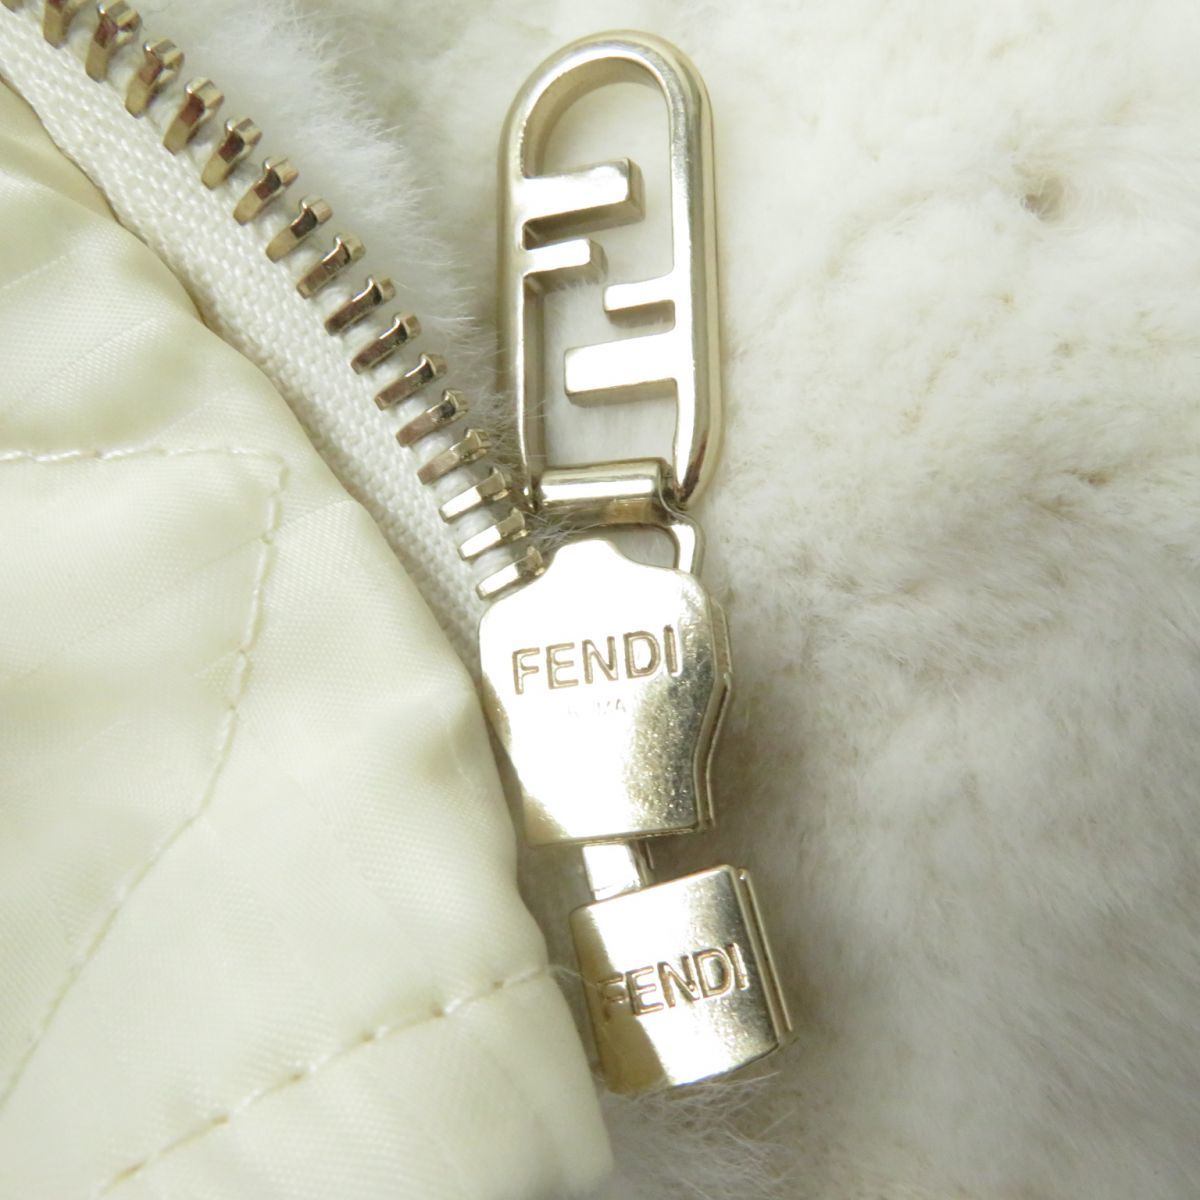  ultimate beautiful goods * regular goods Fendi FNE92L 22 year lining Zucca pattern sheared mink short jacket ivory 38 made in Italy hanger *ga- men to attaching 